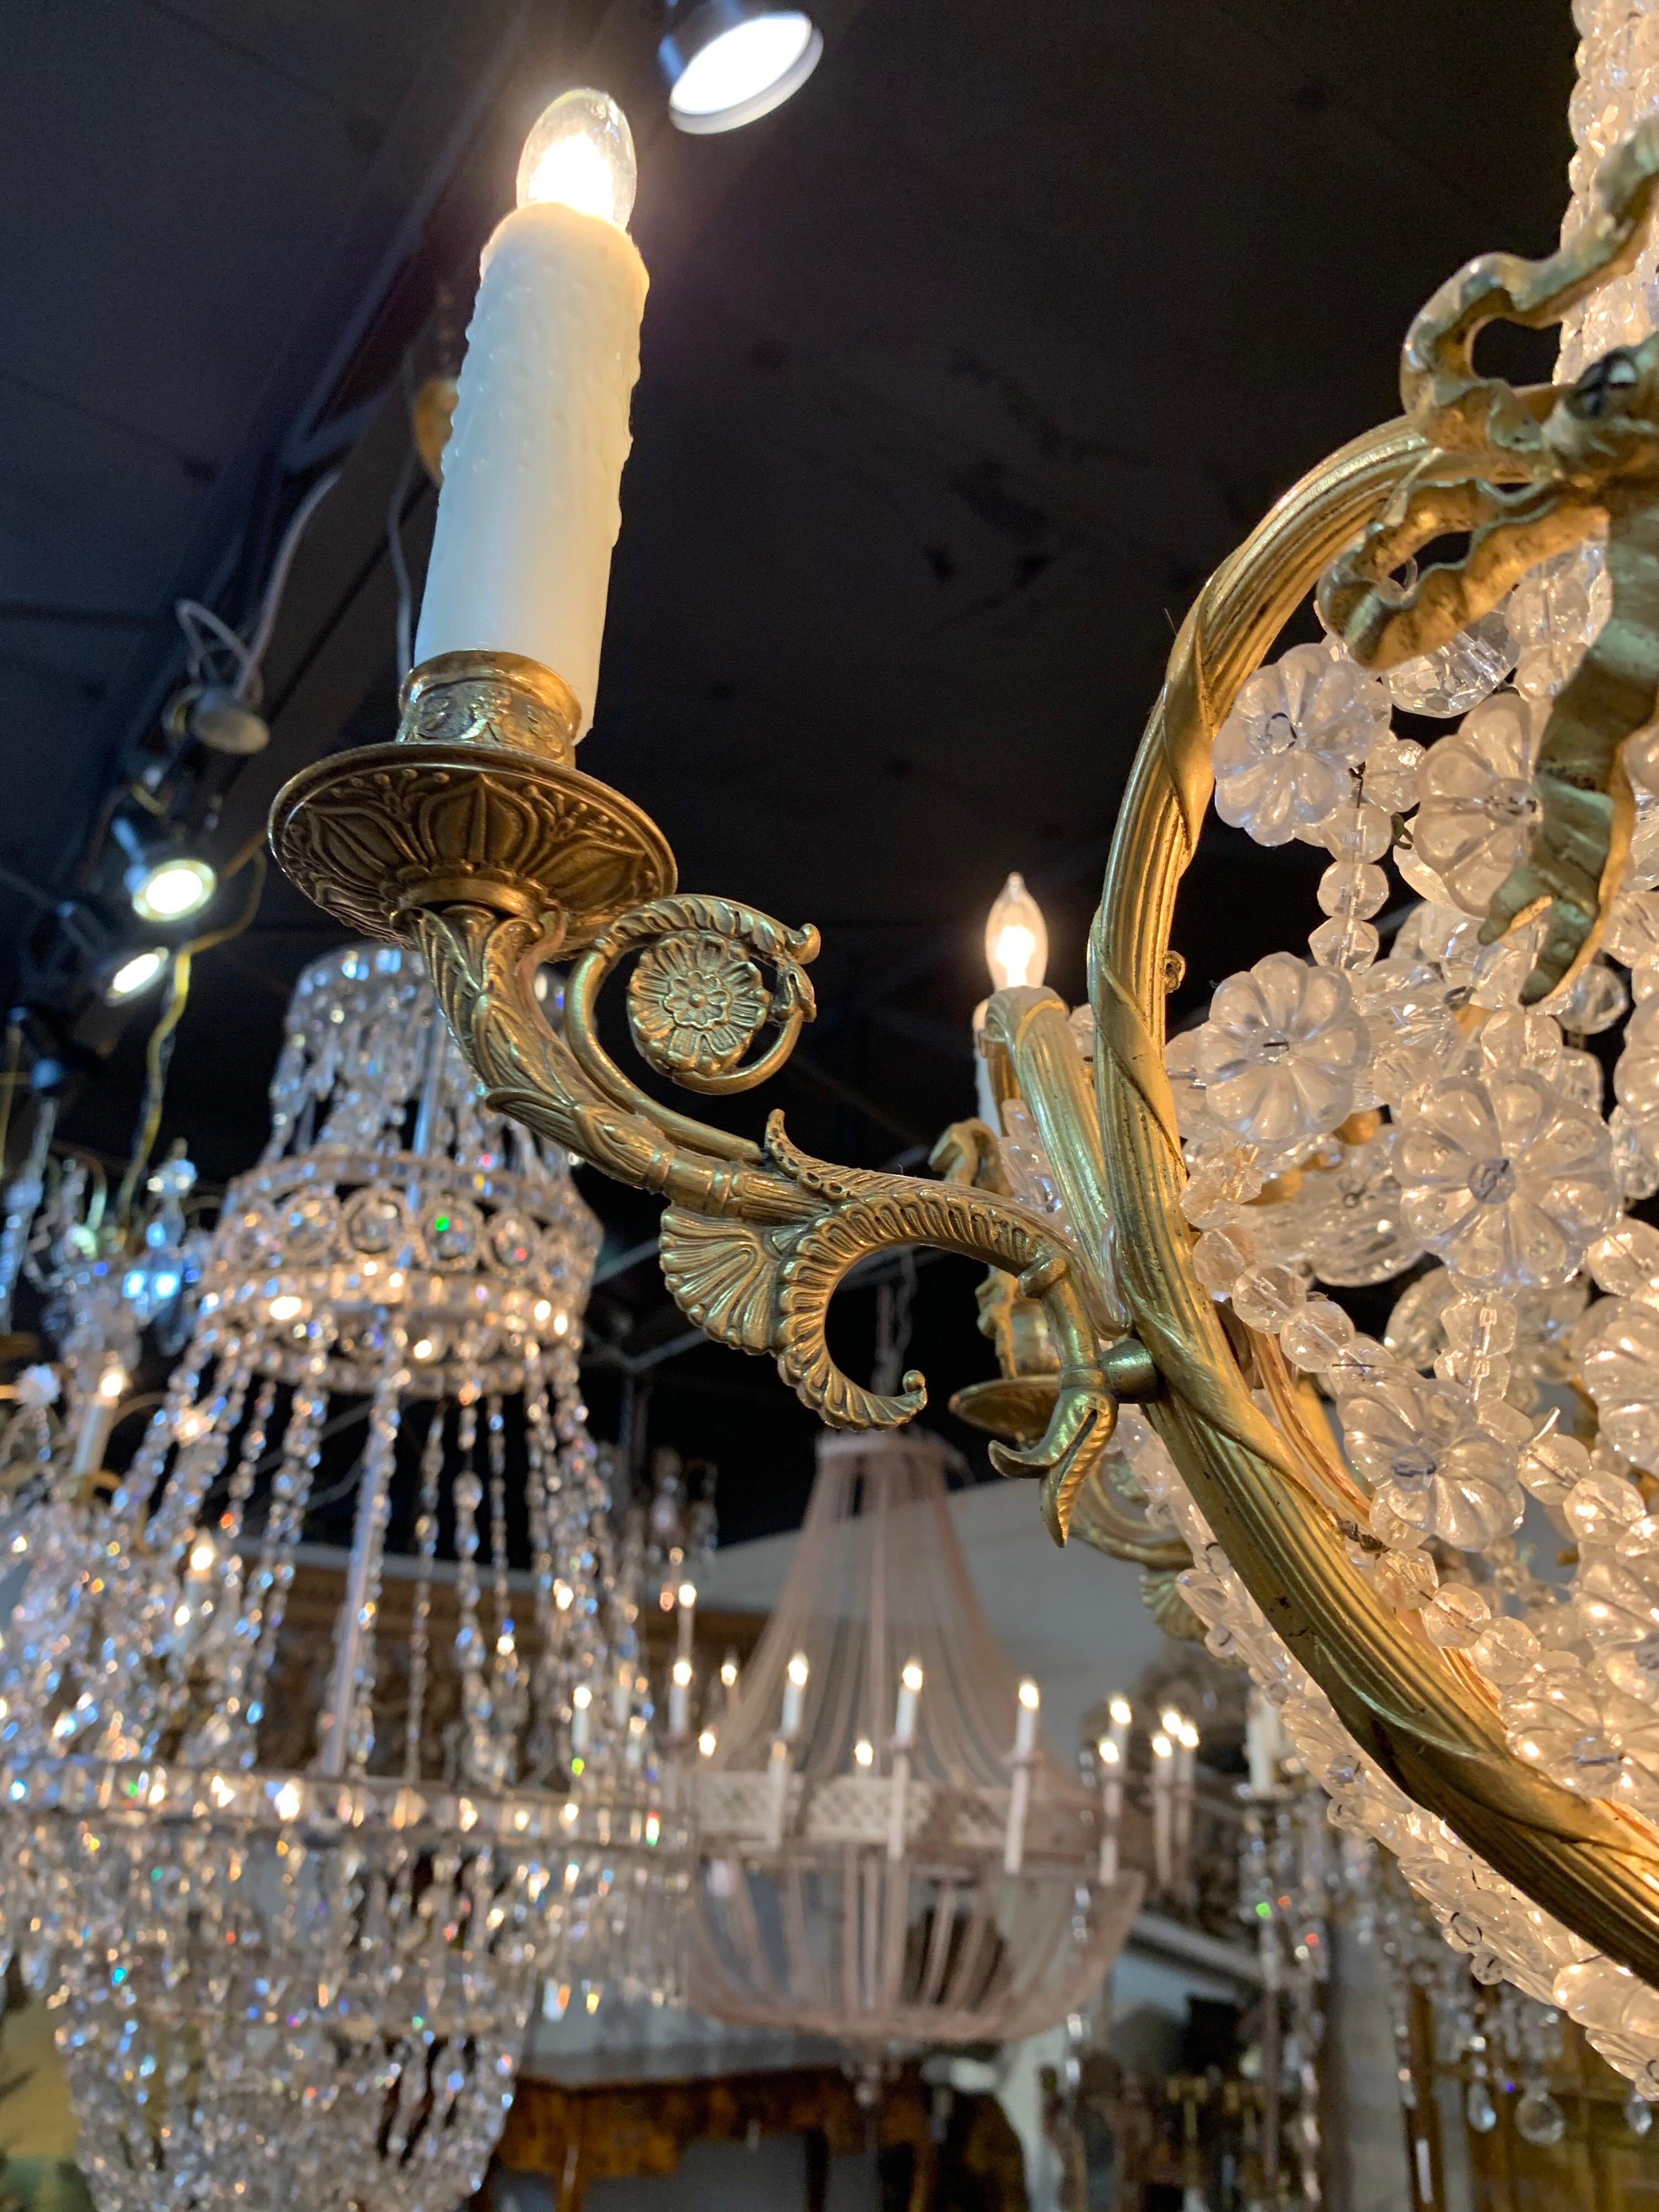 Stunning French Belle Epogue gilt bronze beaded crystal chandelier with 6 lights. The bottom section has beads in the shape of flowers. And the top section has strands of very fine quality beautiful crystals. Creates a very elegant look!